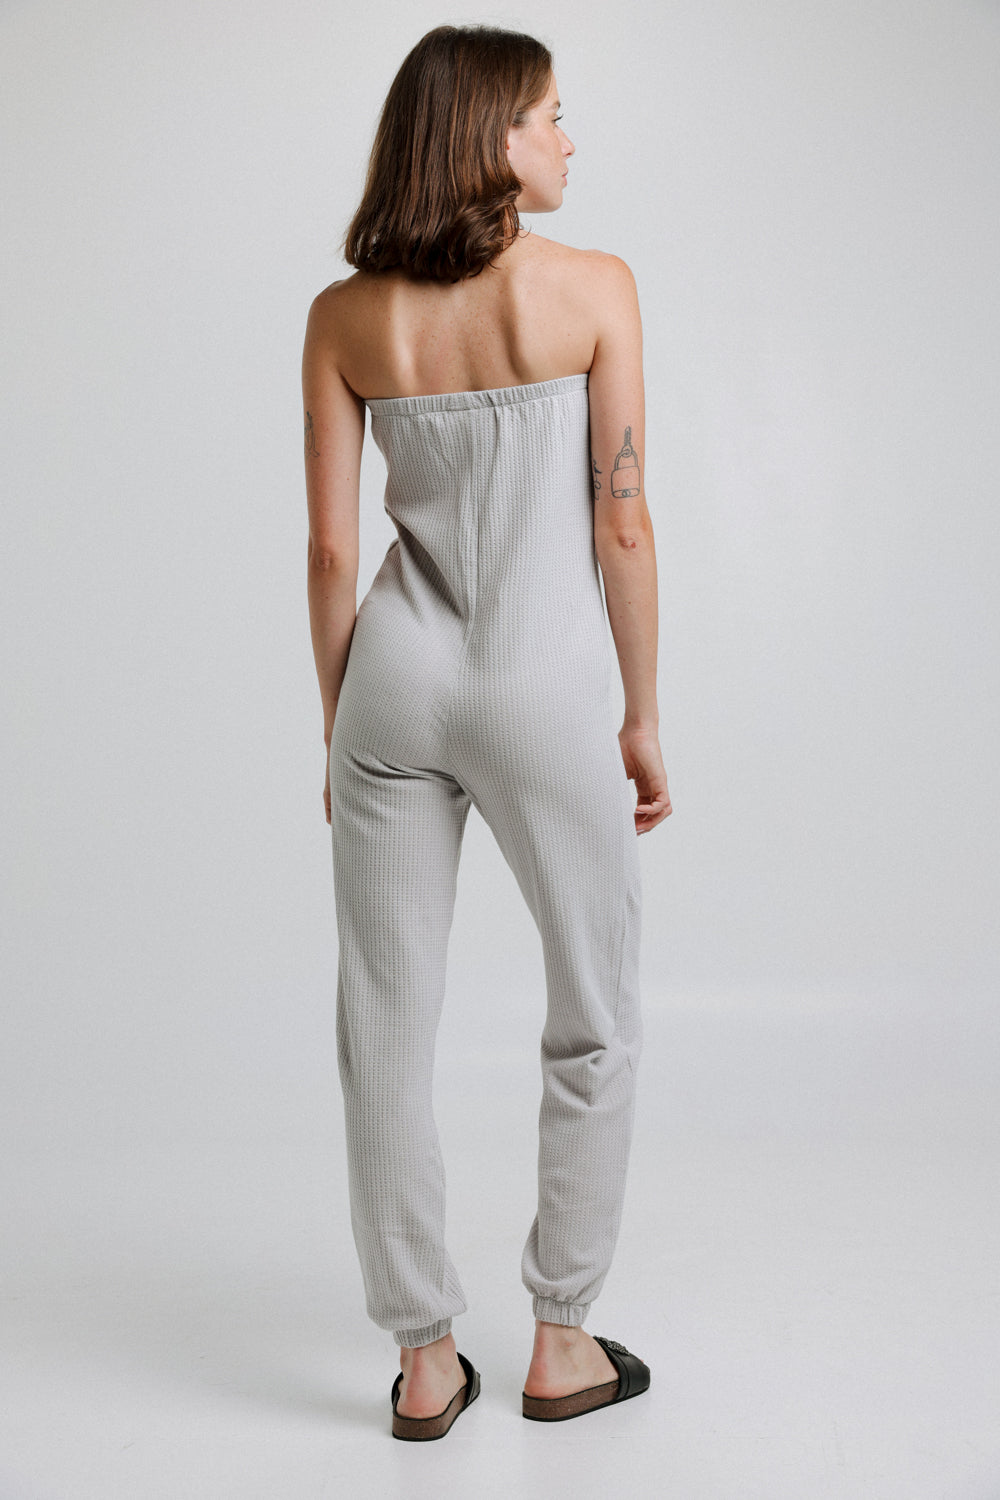 Trublle Grey Waffle Jumpsuit